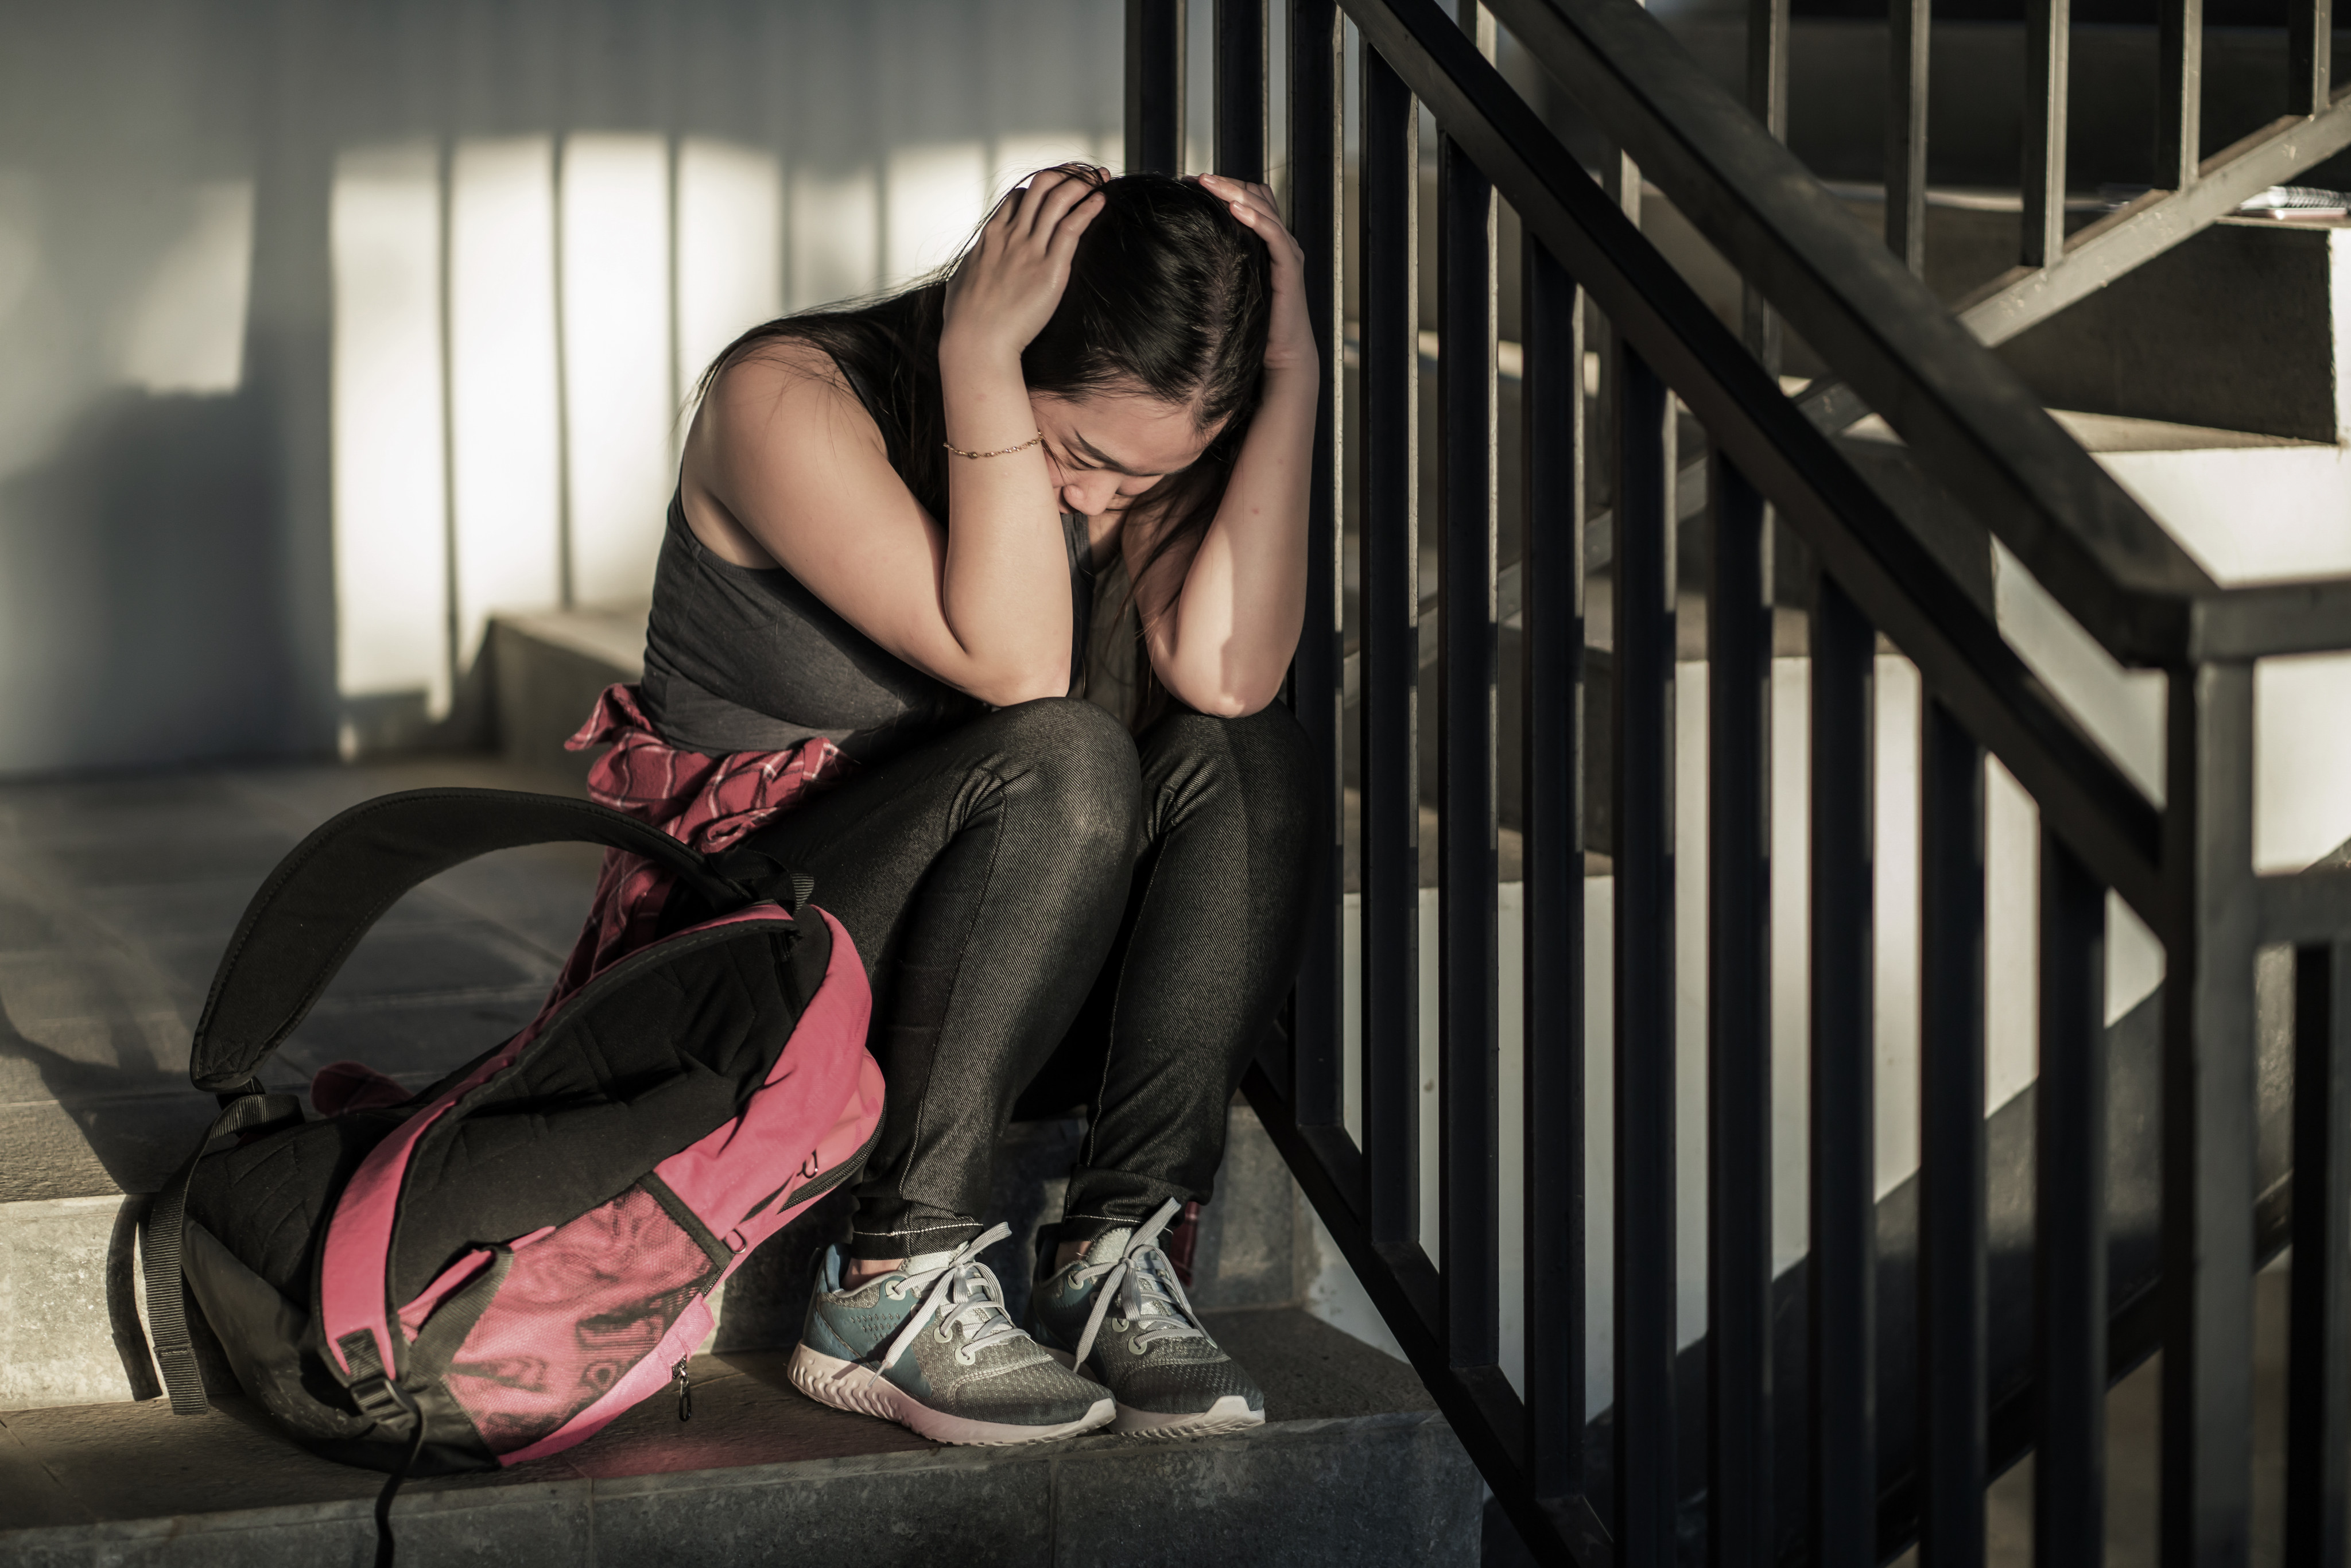 A major HKU study has found that more than 16 per cent of young people have likely mental health problems. Photo: Shutterstock